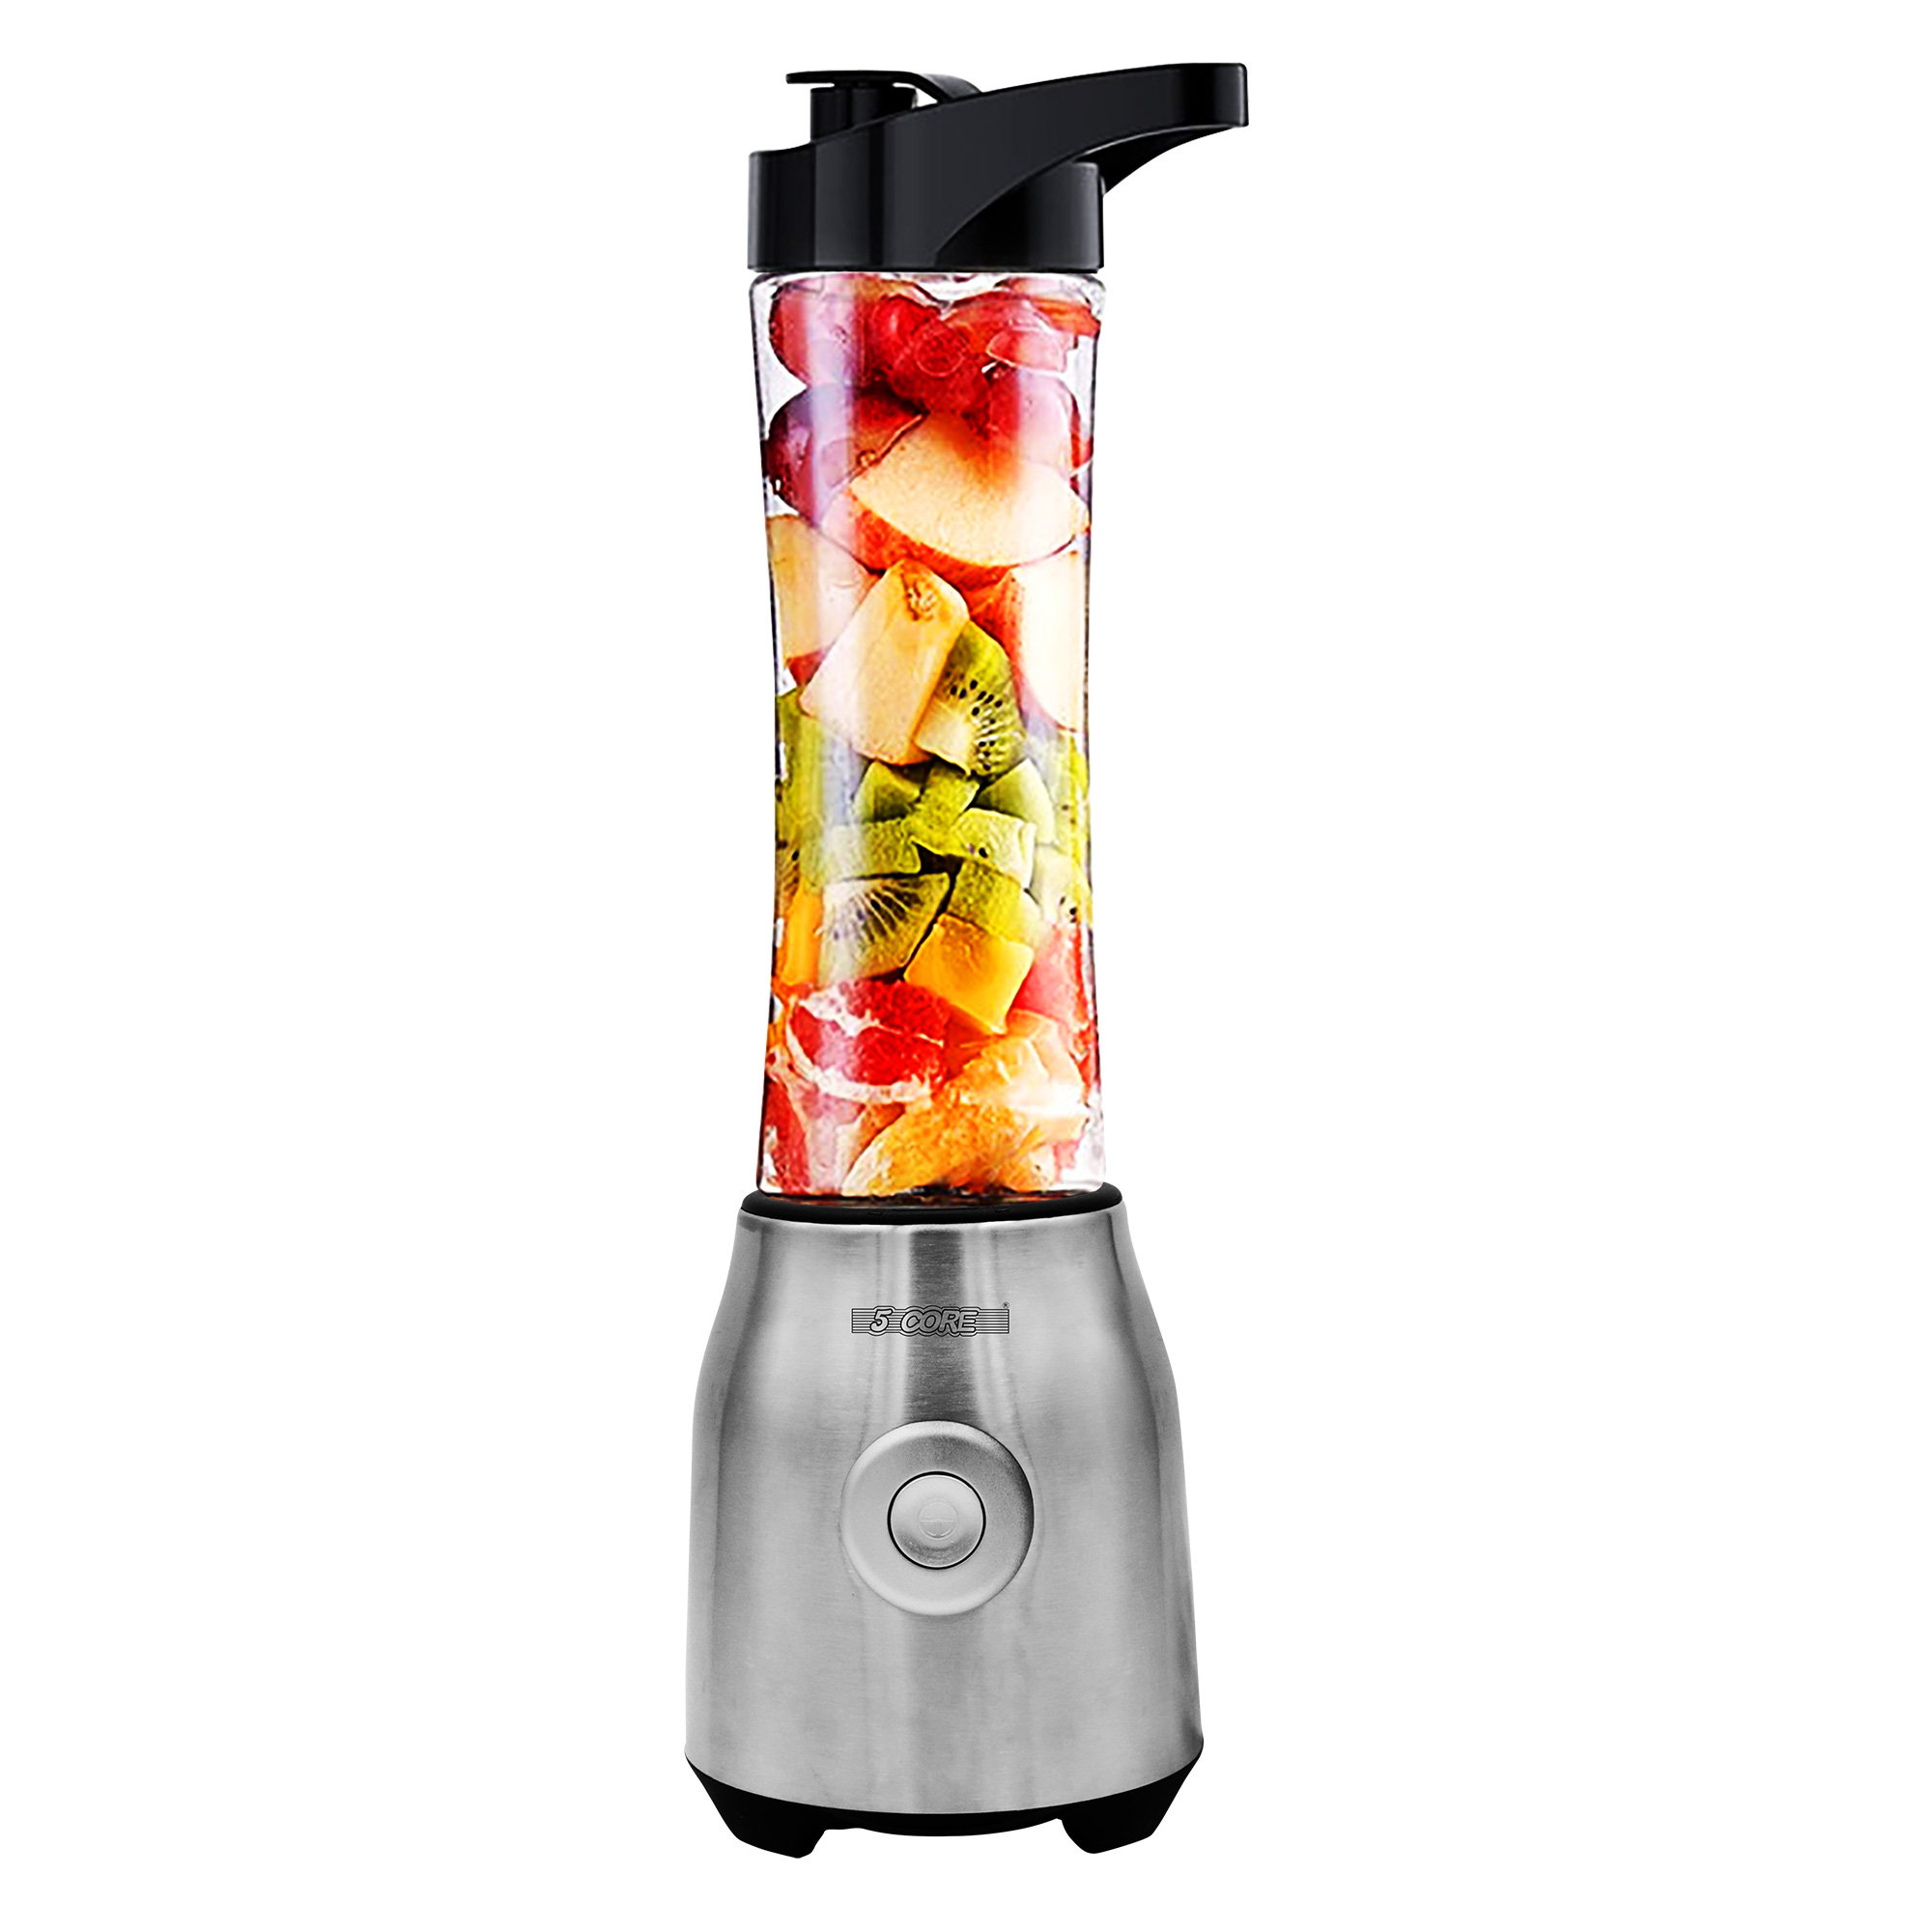 Portable Blender For Smoothies - Power And Ease On The Go